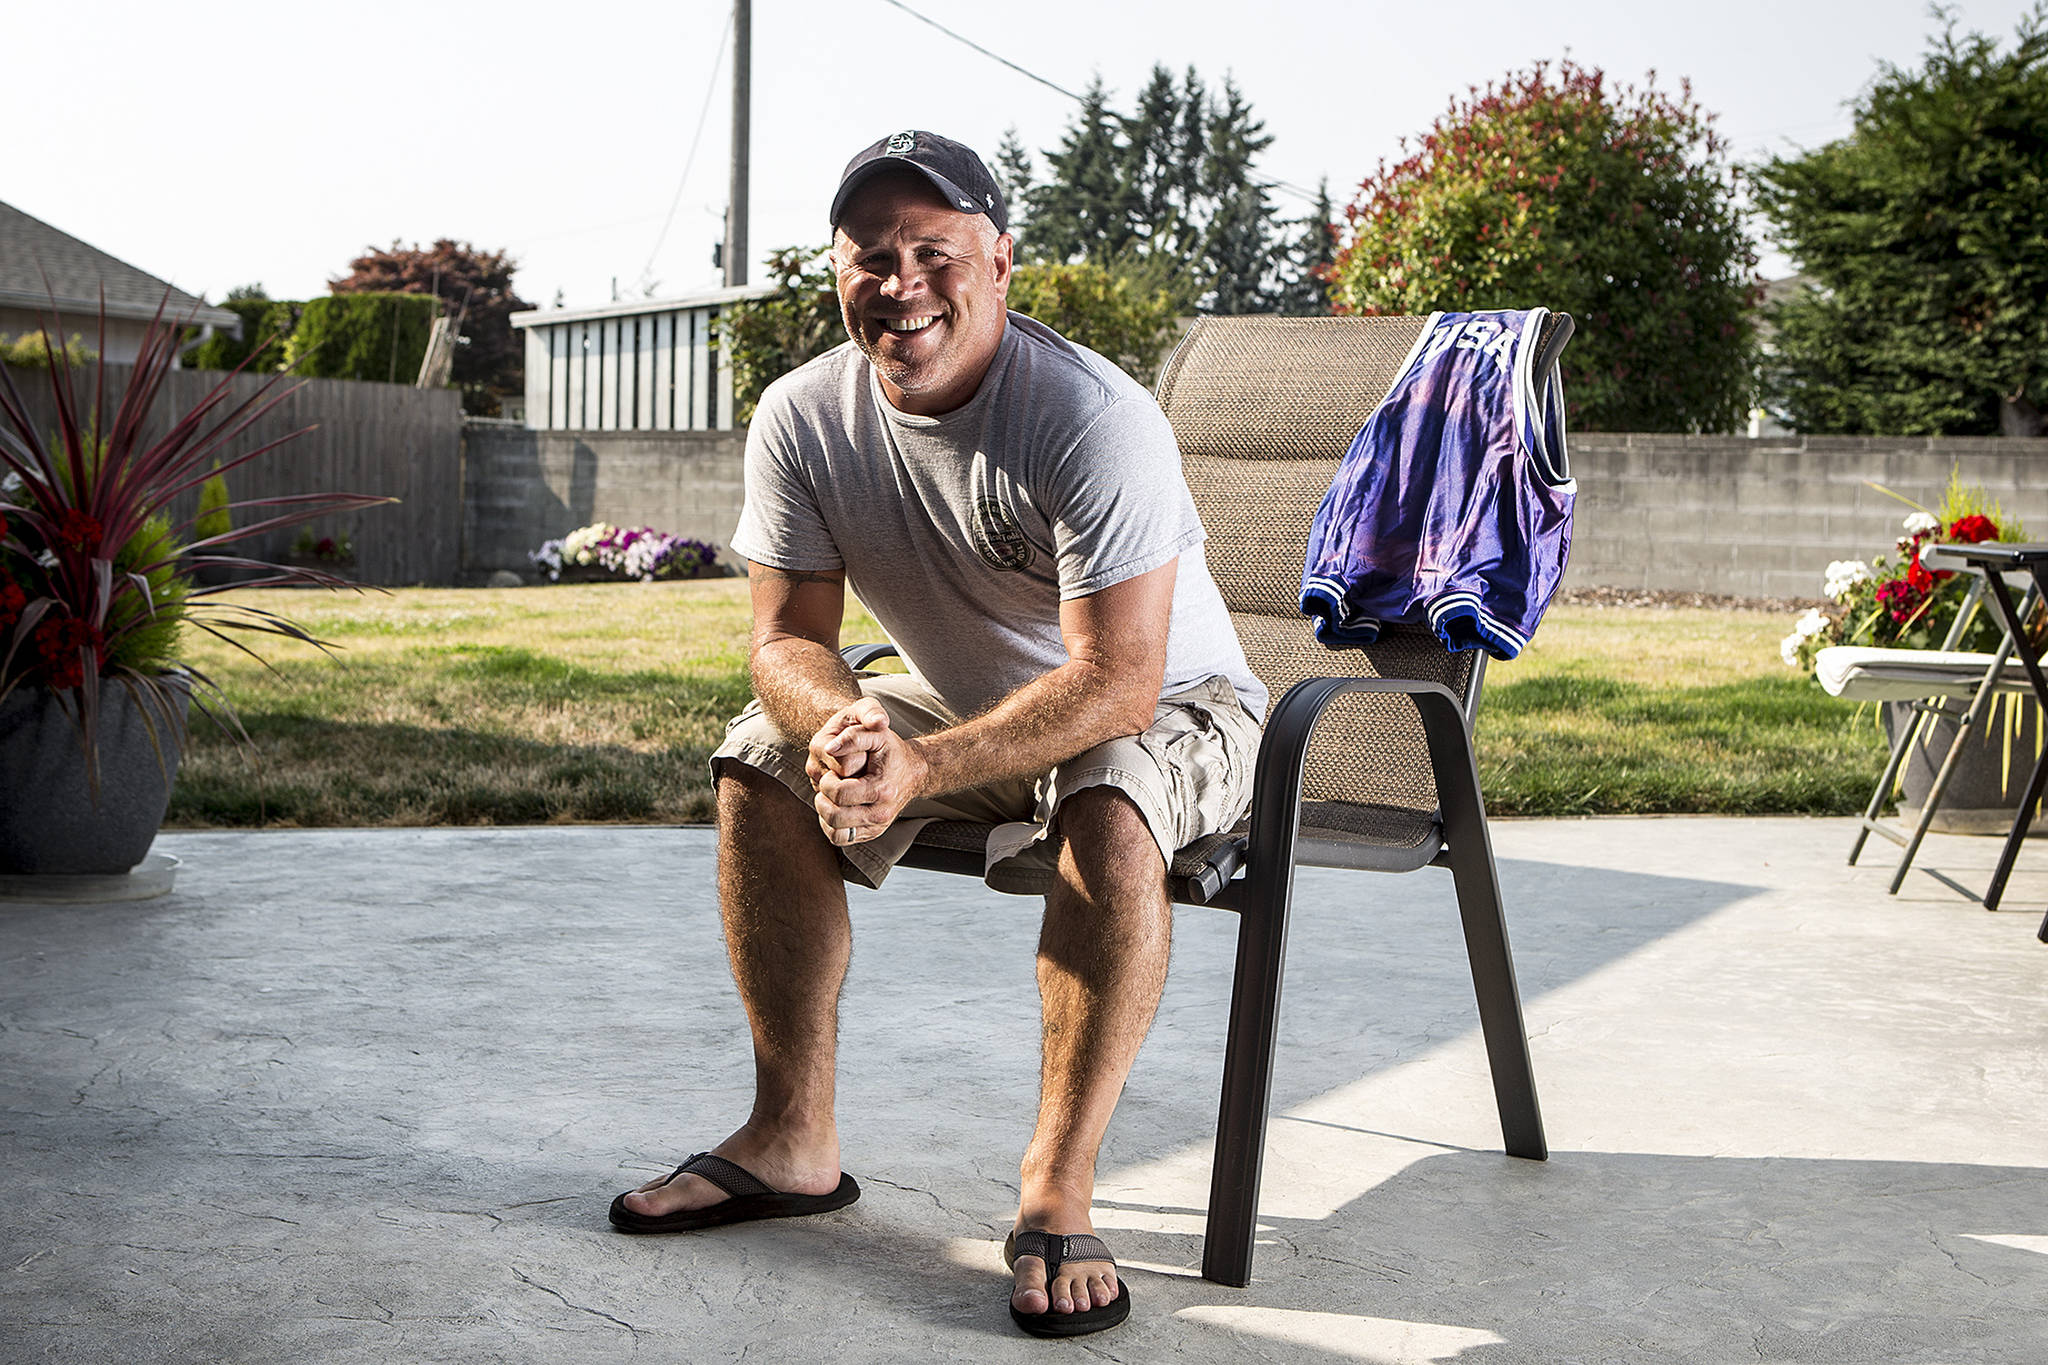 Everett High School alum James Stephens is one of just eight wrestlers from Snohomish County to compete internationally since 1990. (Ian Terry / The Herald)